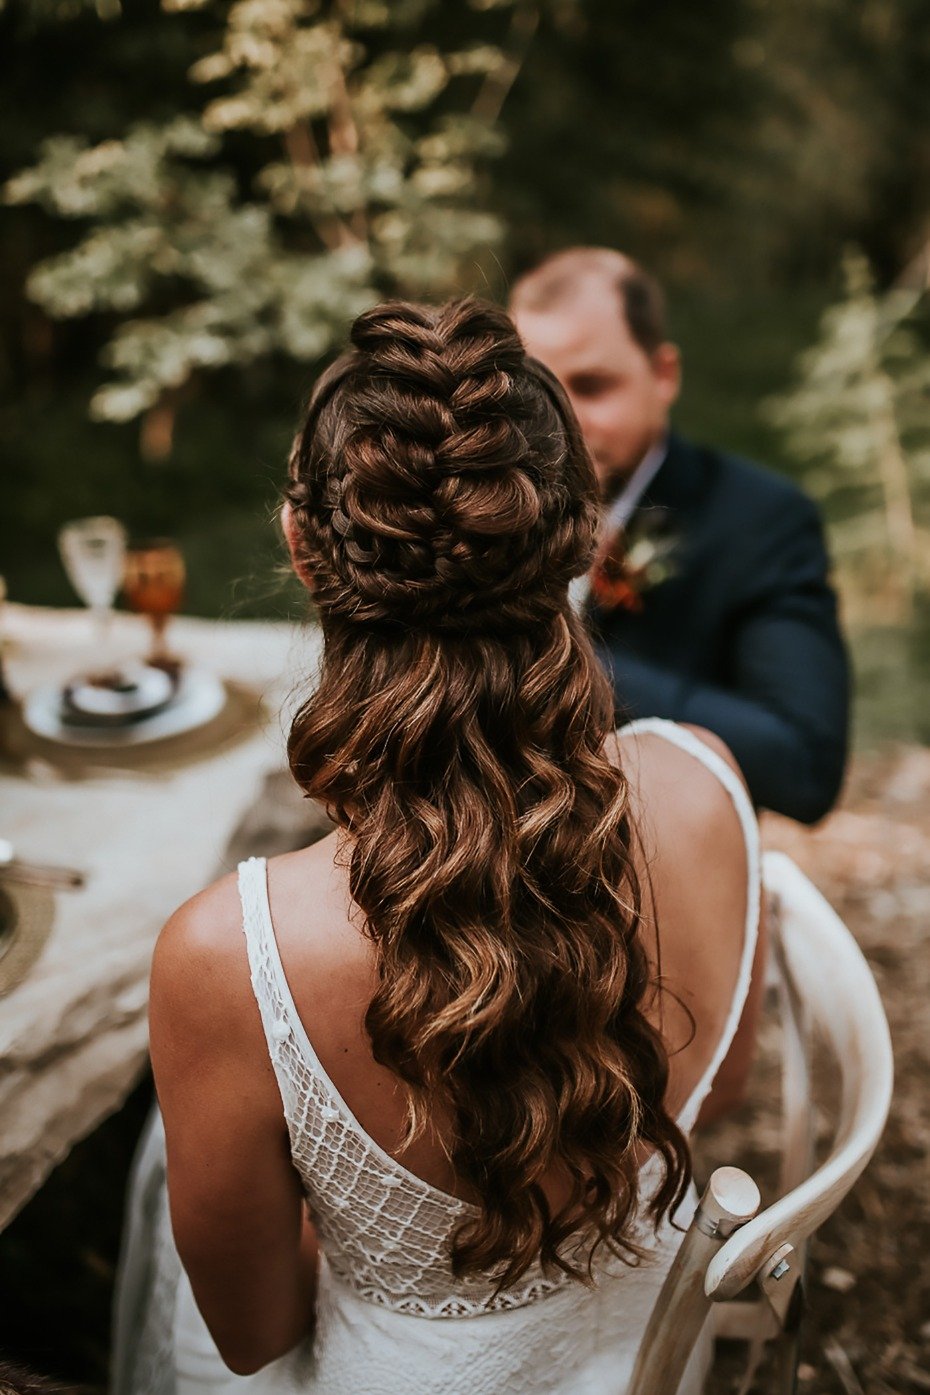 dramatic Game of Thrones styled wedding hair